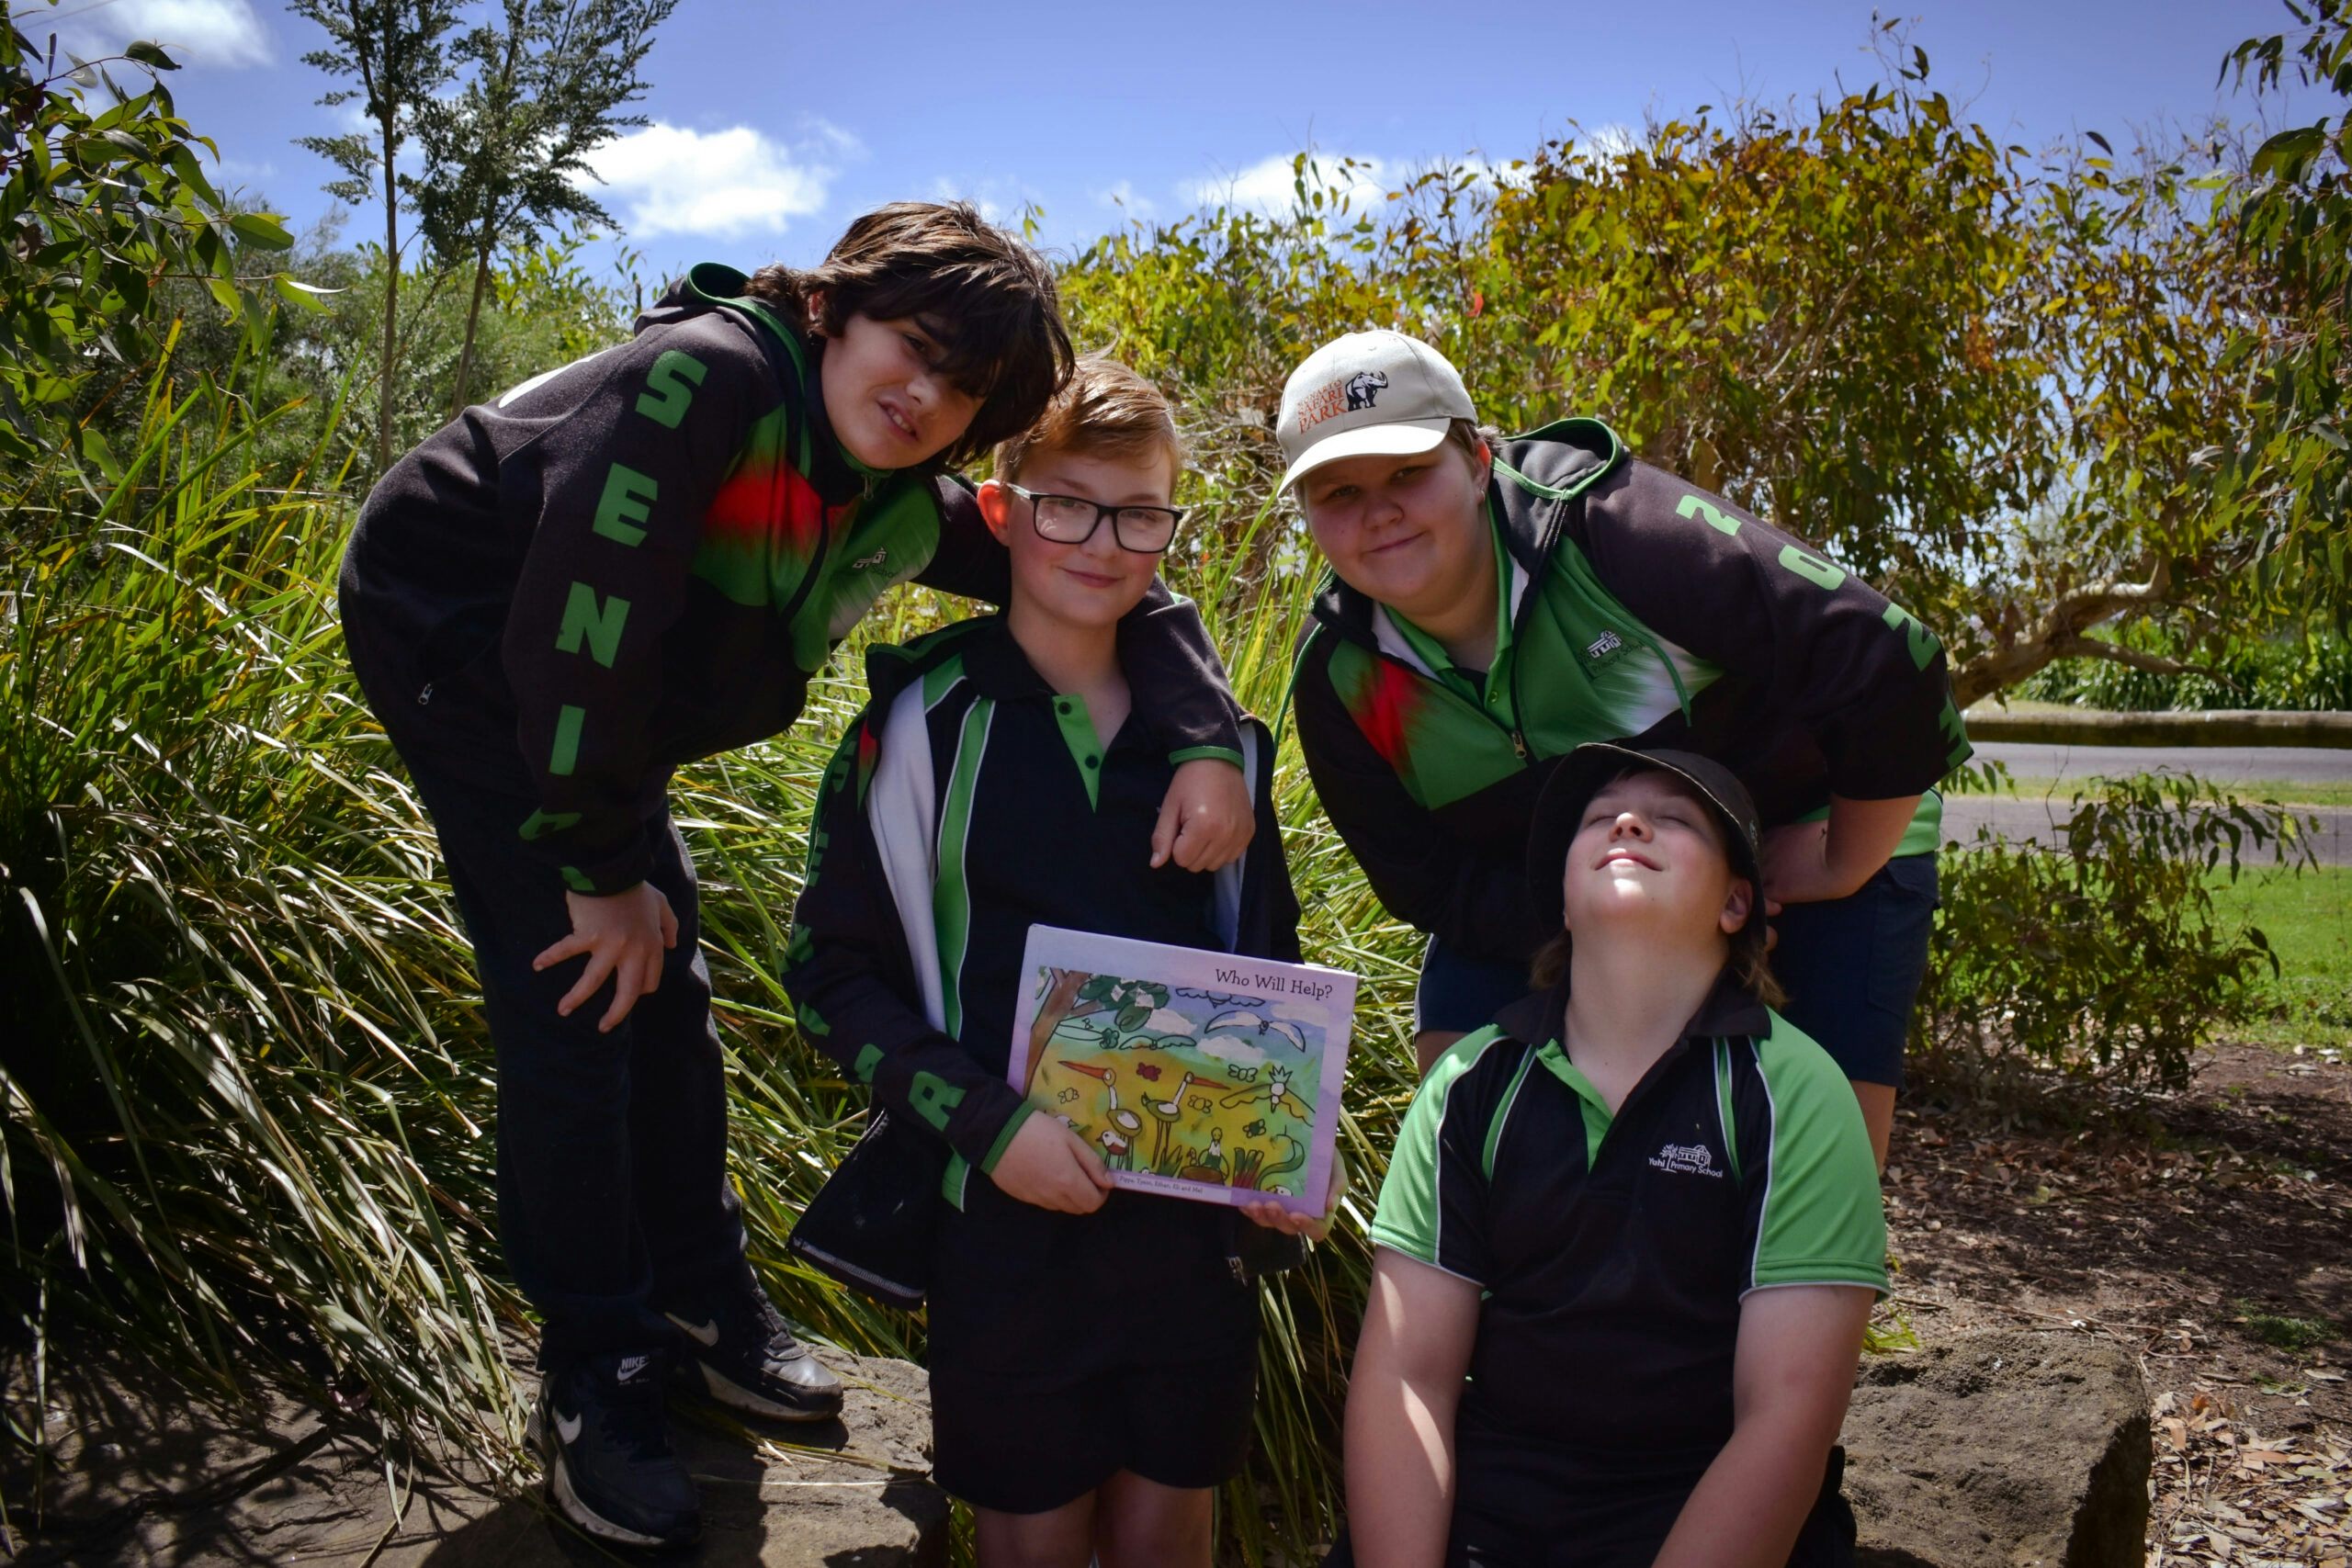 Thumbnail for Local students create story to inspire care for nature